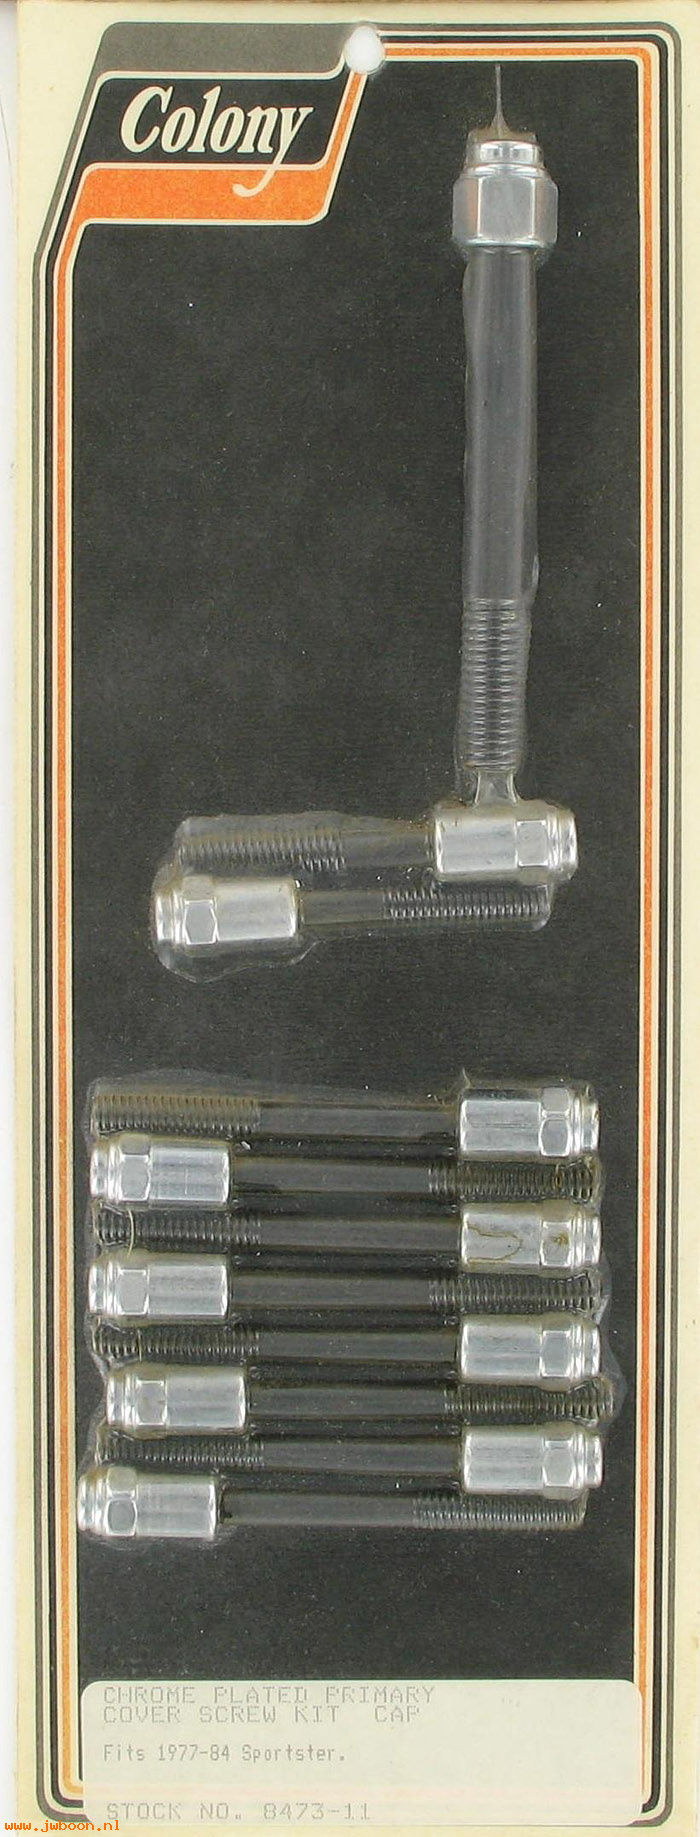 C 8473-11 (): Primary cover screw kit - Ironhead Sportster XL '77-'85, in stock